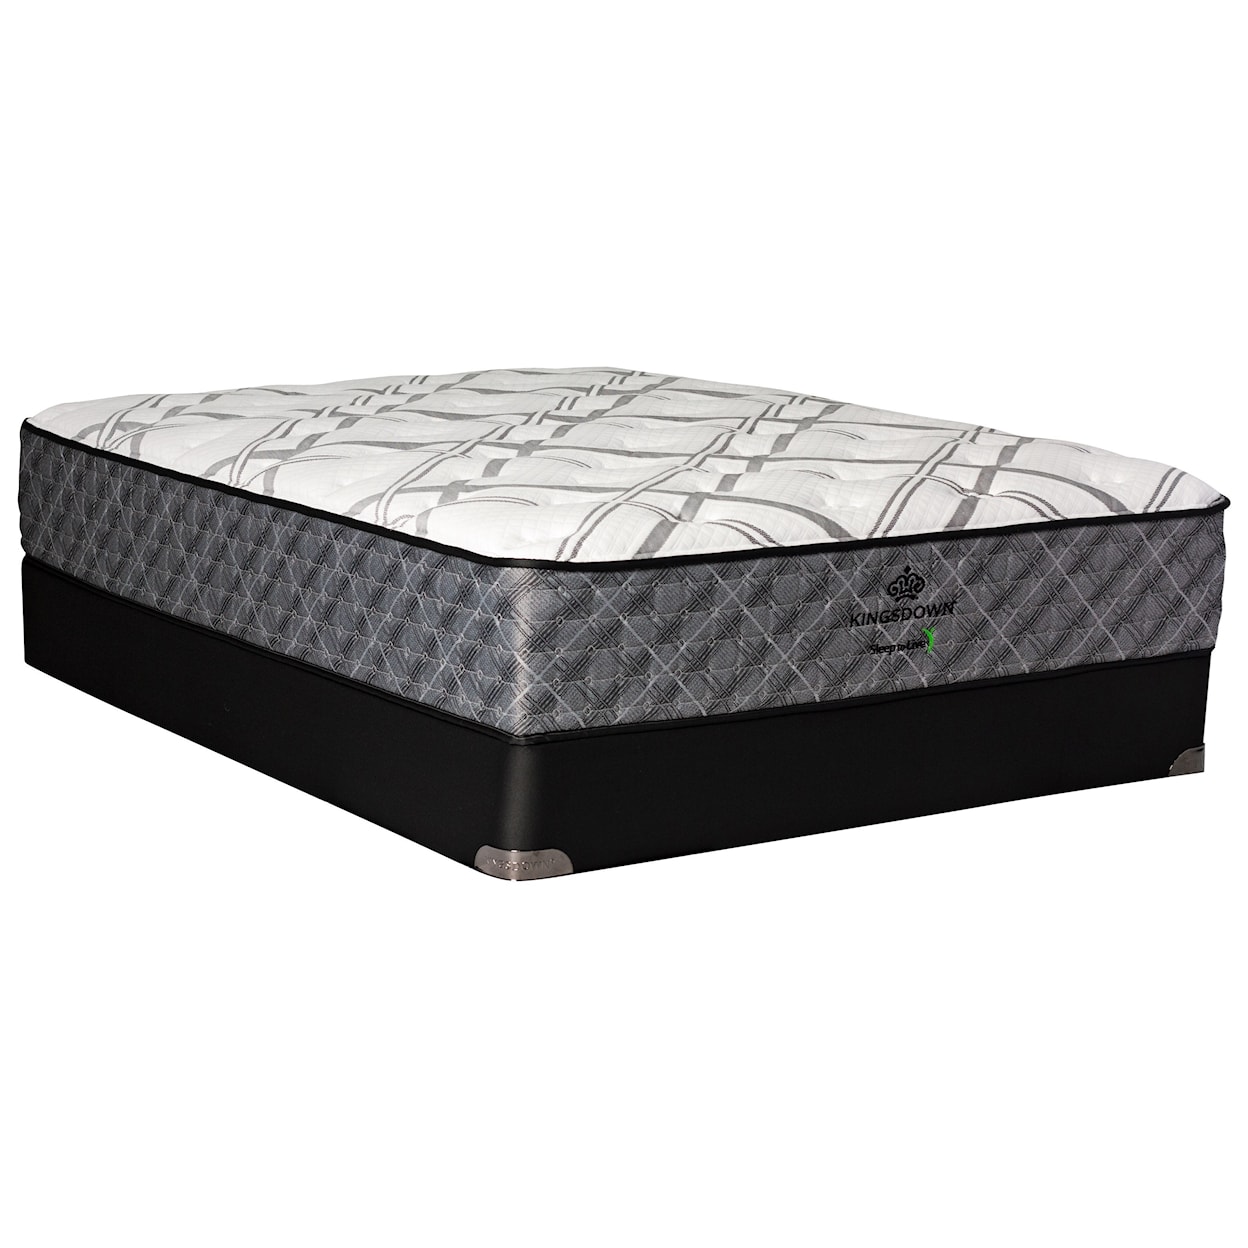 Kingsdown 6000 Series Euro Top Blue Red Full Firm Coil on Coil Euro Top Mattress Set